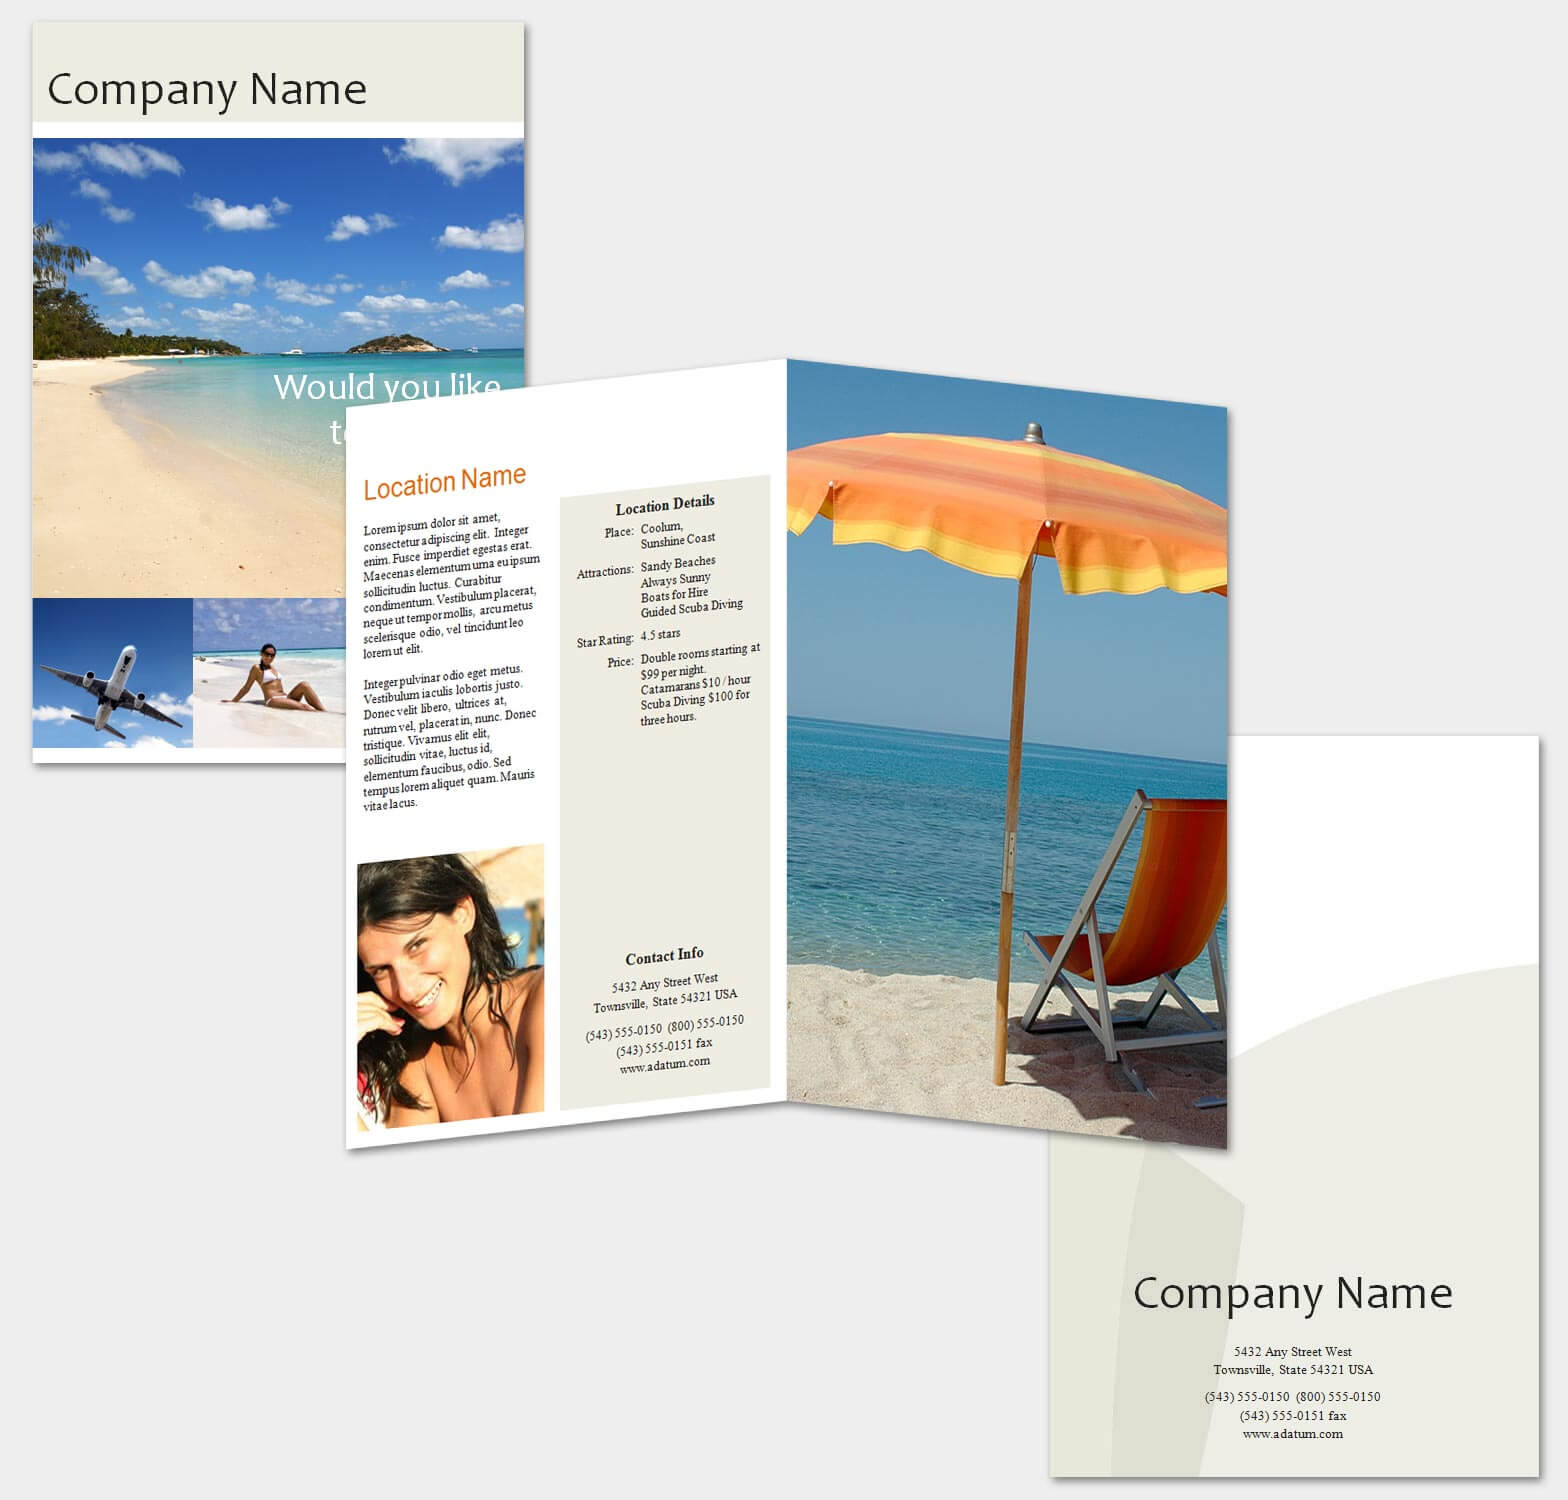 Cruise Travel Brochure Template Word Amp Publisher Brochure With Regard To Word Travel Brochure Template